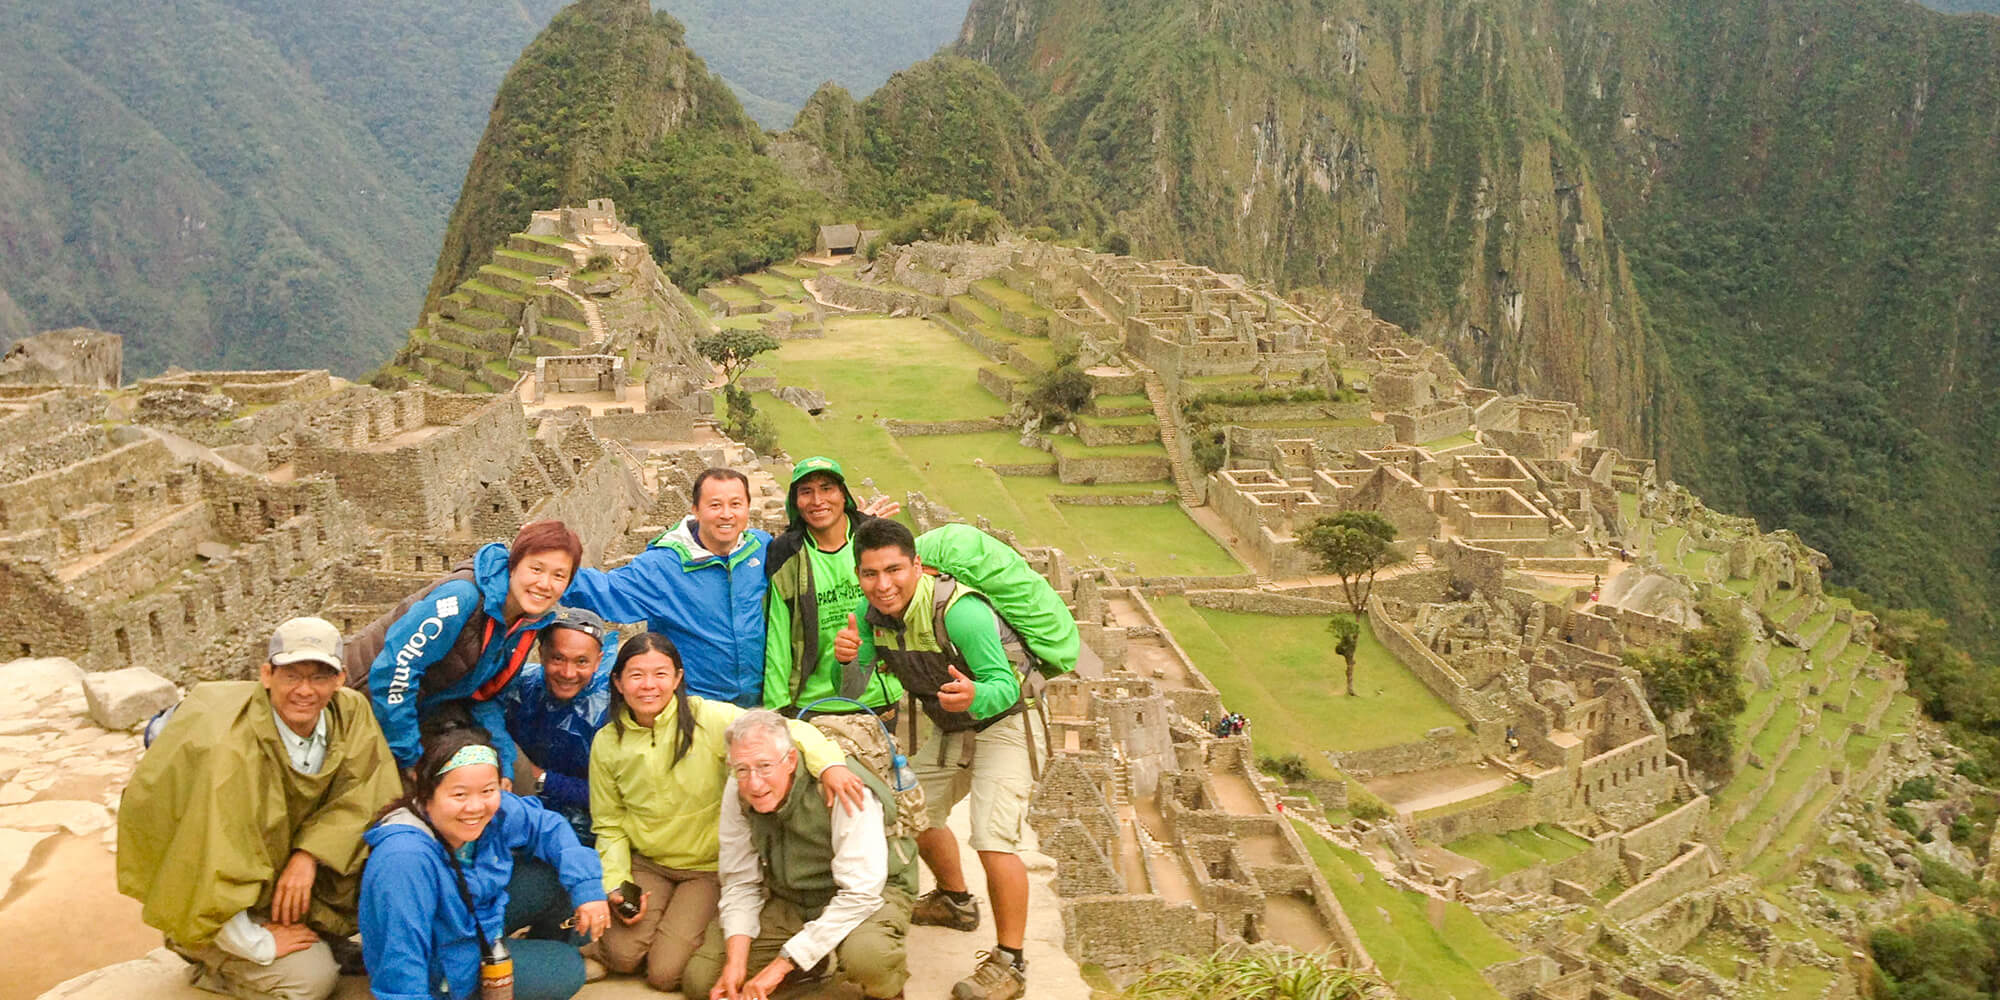 10 Things I Loved About Trekking to Machu Picchu with Alpaca Expeditions